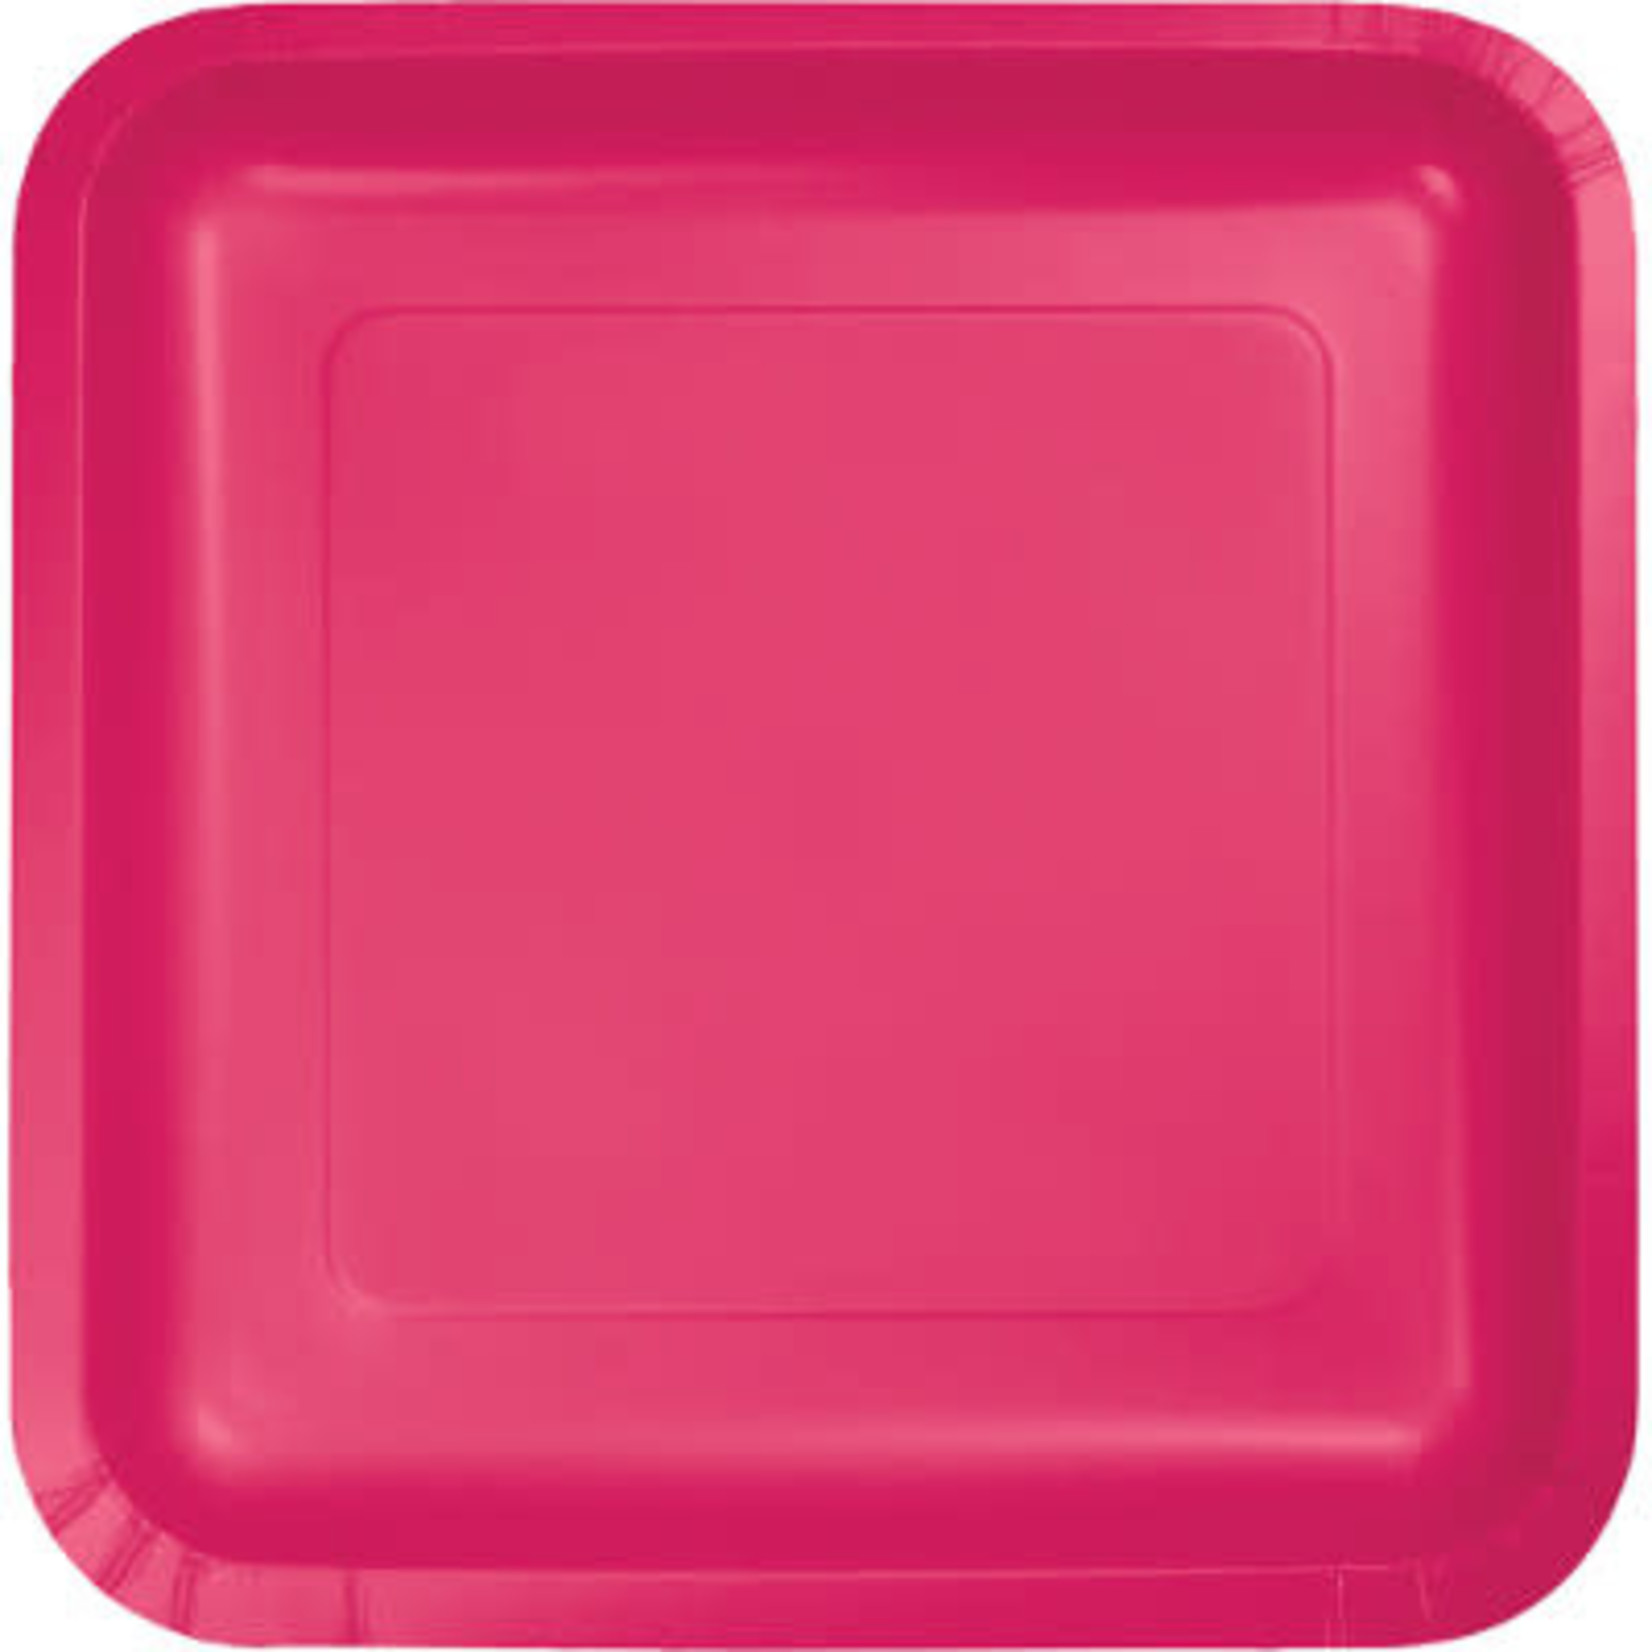 Touch of Color 7" Magenta Pink Square Paper Plates - 18ct.